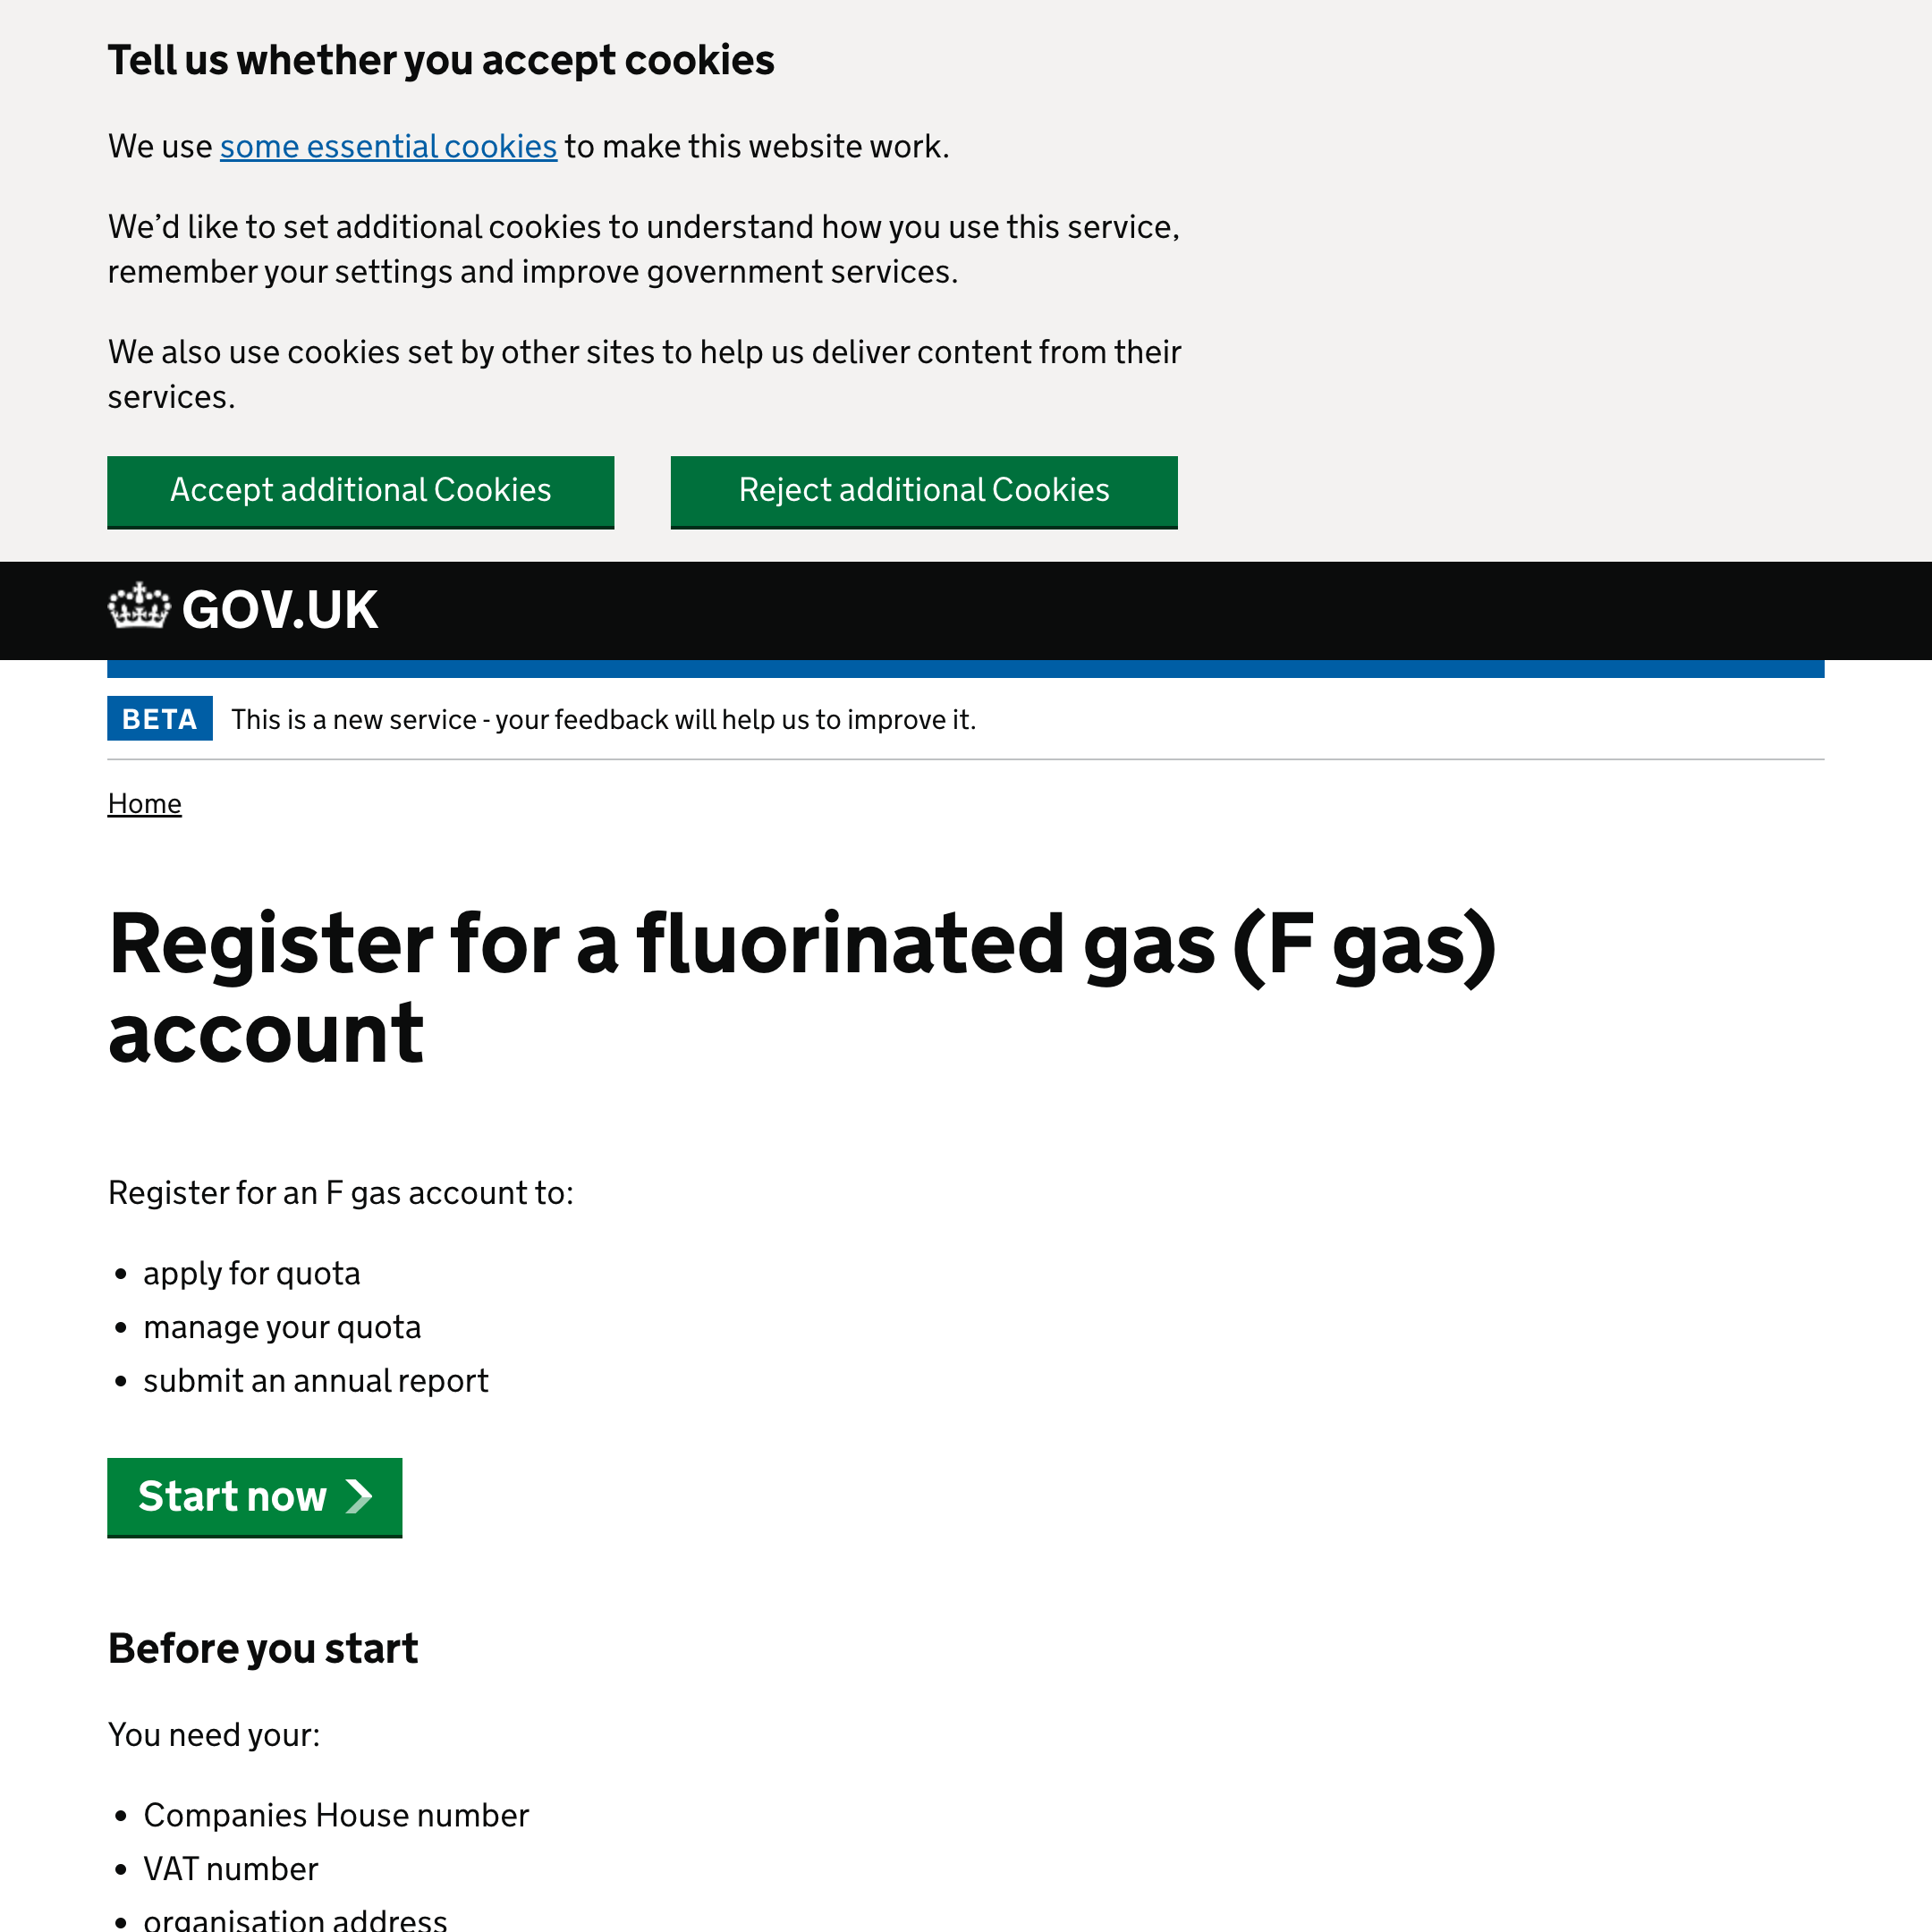 Register for a fluorinated gas (F gas) account